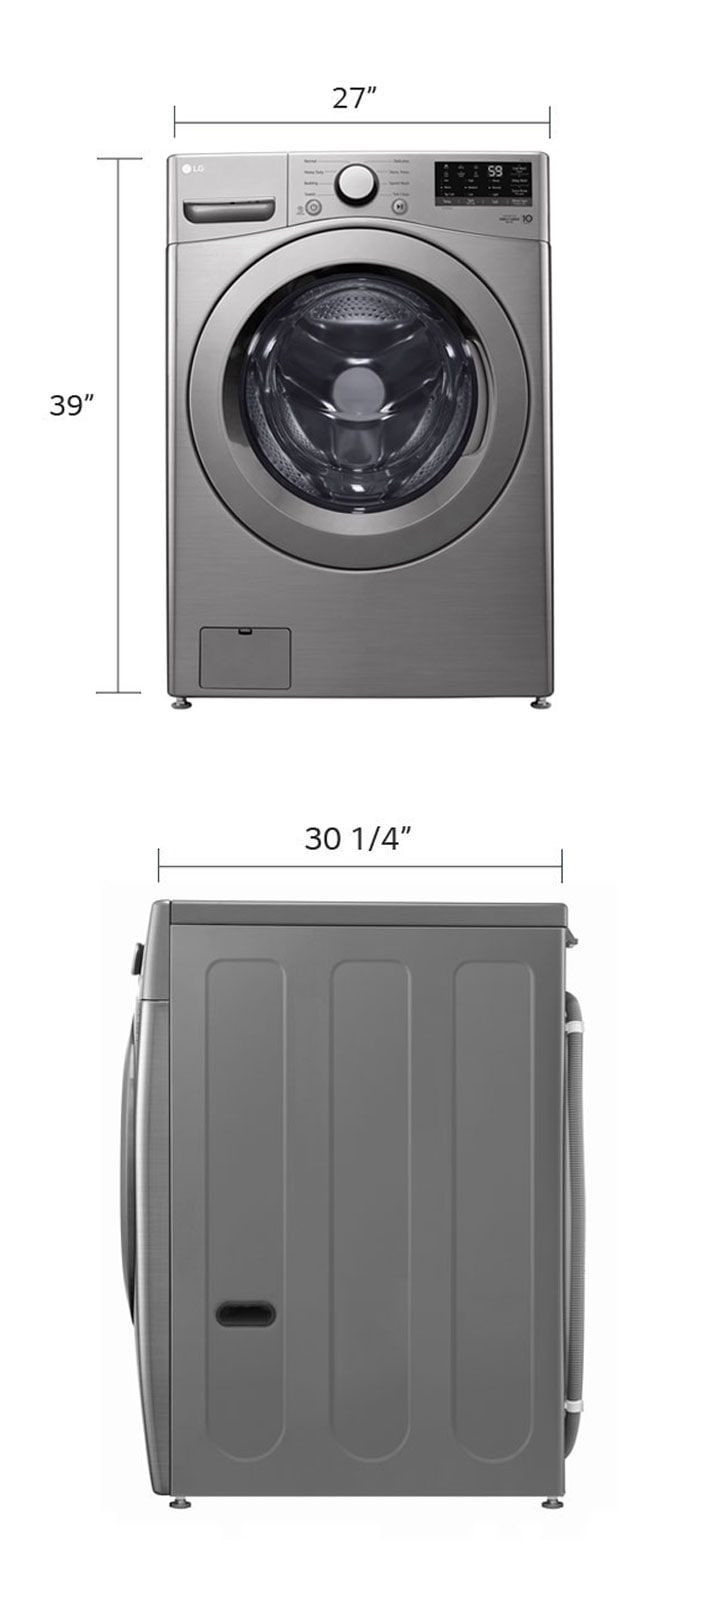 uCreate: May 2017  Laundry pair, Front load washer, Lg washer and dryer